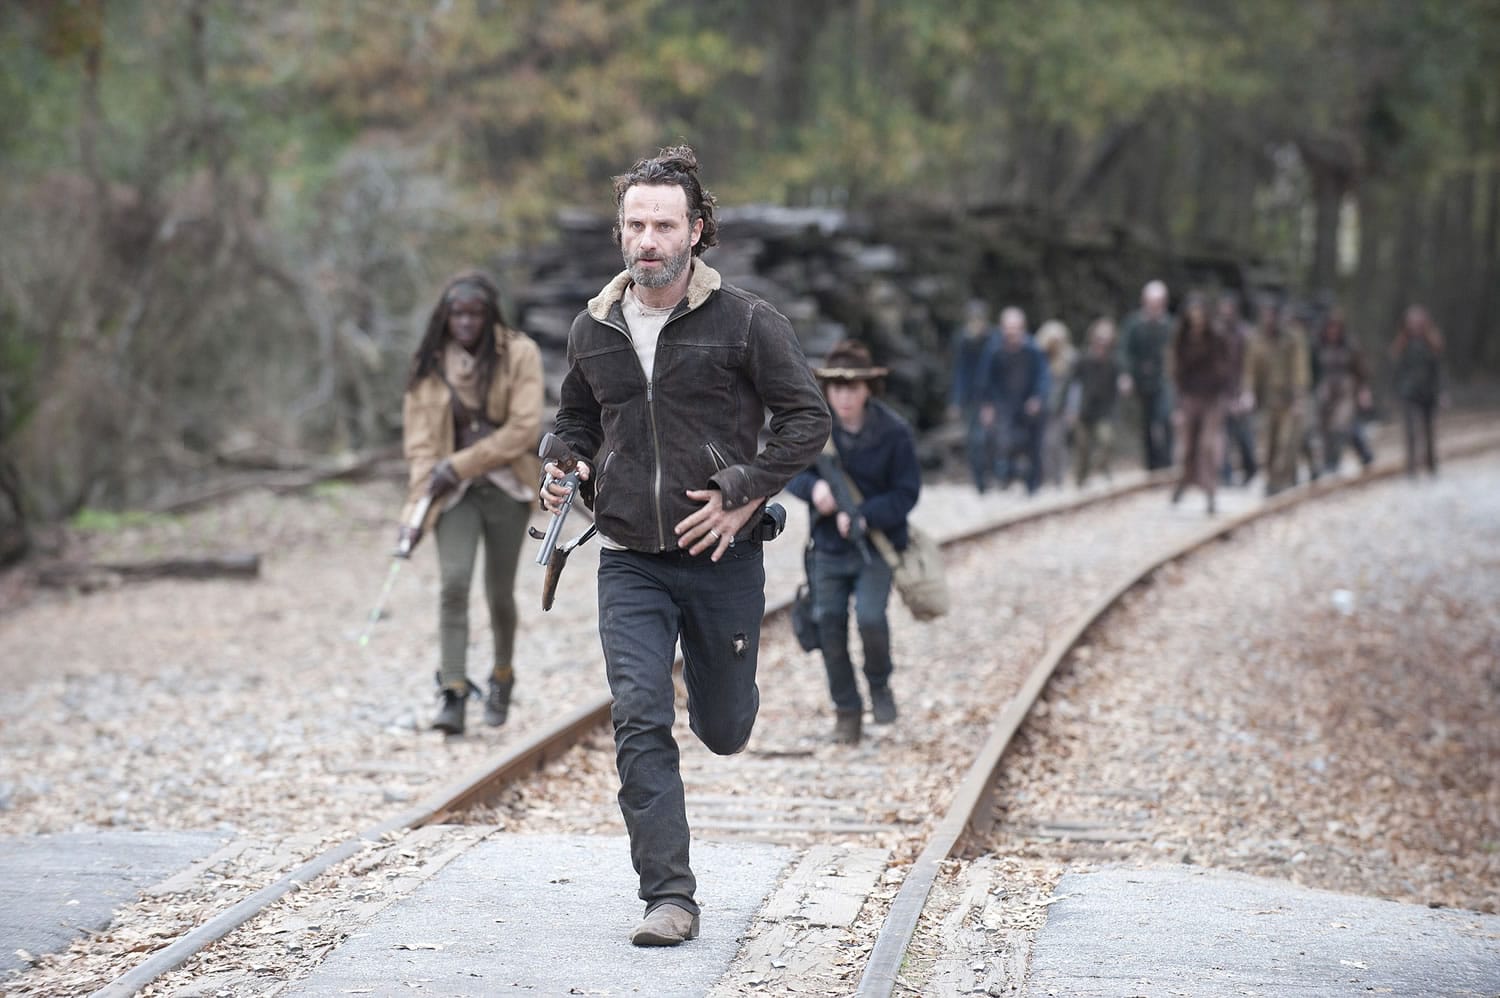 Michonne, from left, played by Danai Gurira, Rick Grimes, played by Andrew Lincoln, and Carl Grimes, played by Chandler Riggs, in a scene from AMC's hit series &quot;The Walking Dead.&quot;